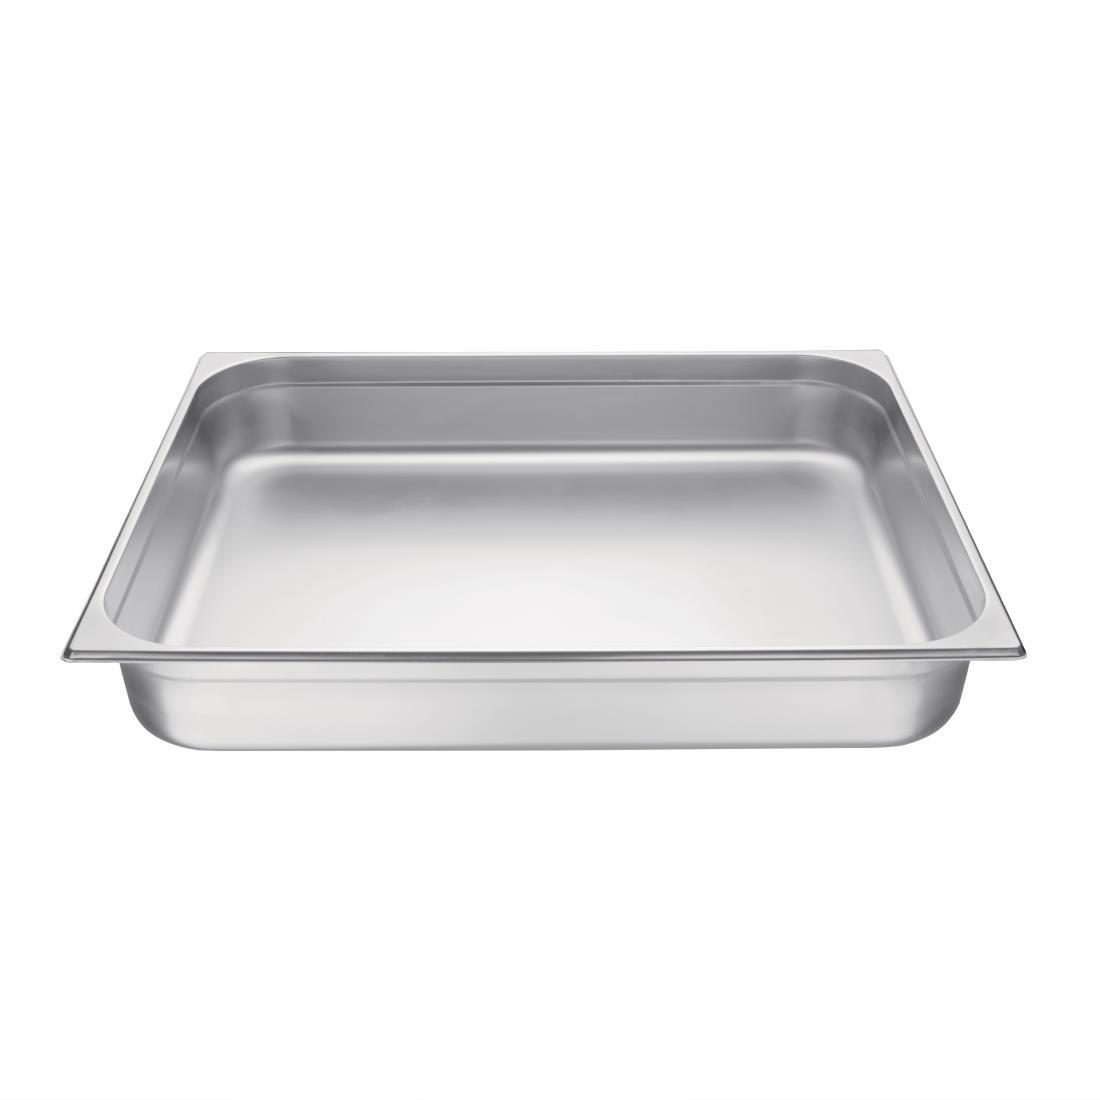 Vogue Stainless Steel 2/1 Gastronorm Pan 100mm - K804  - 2